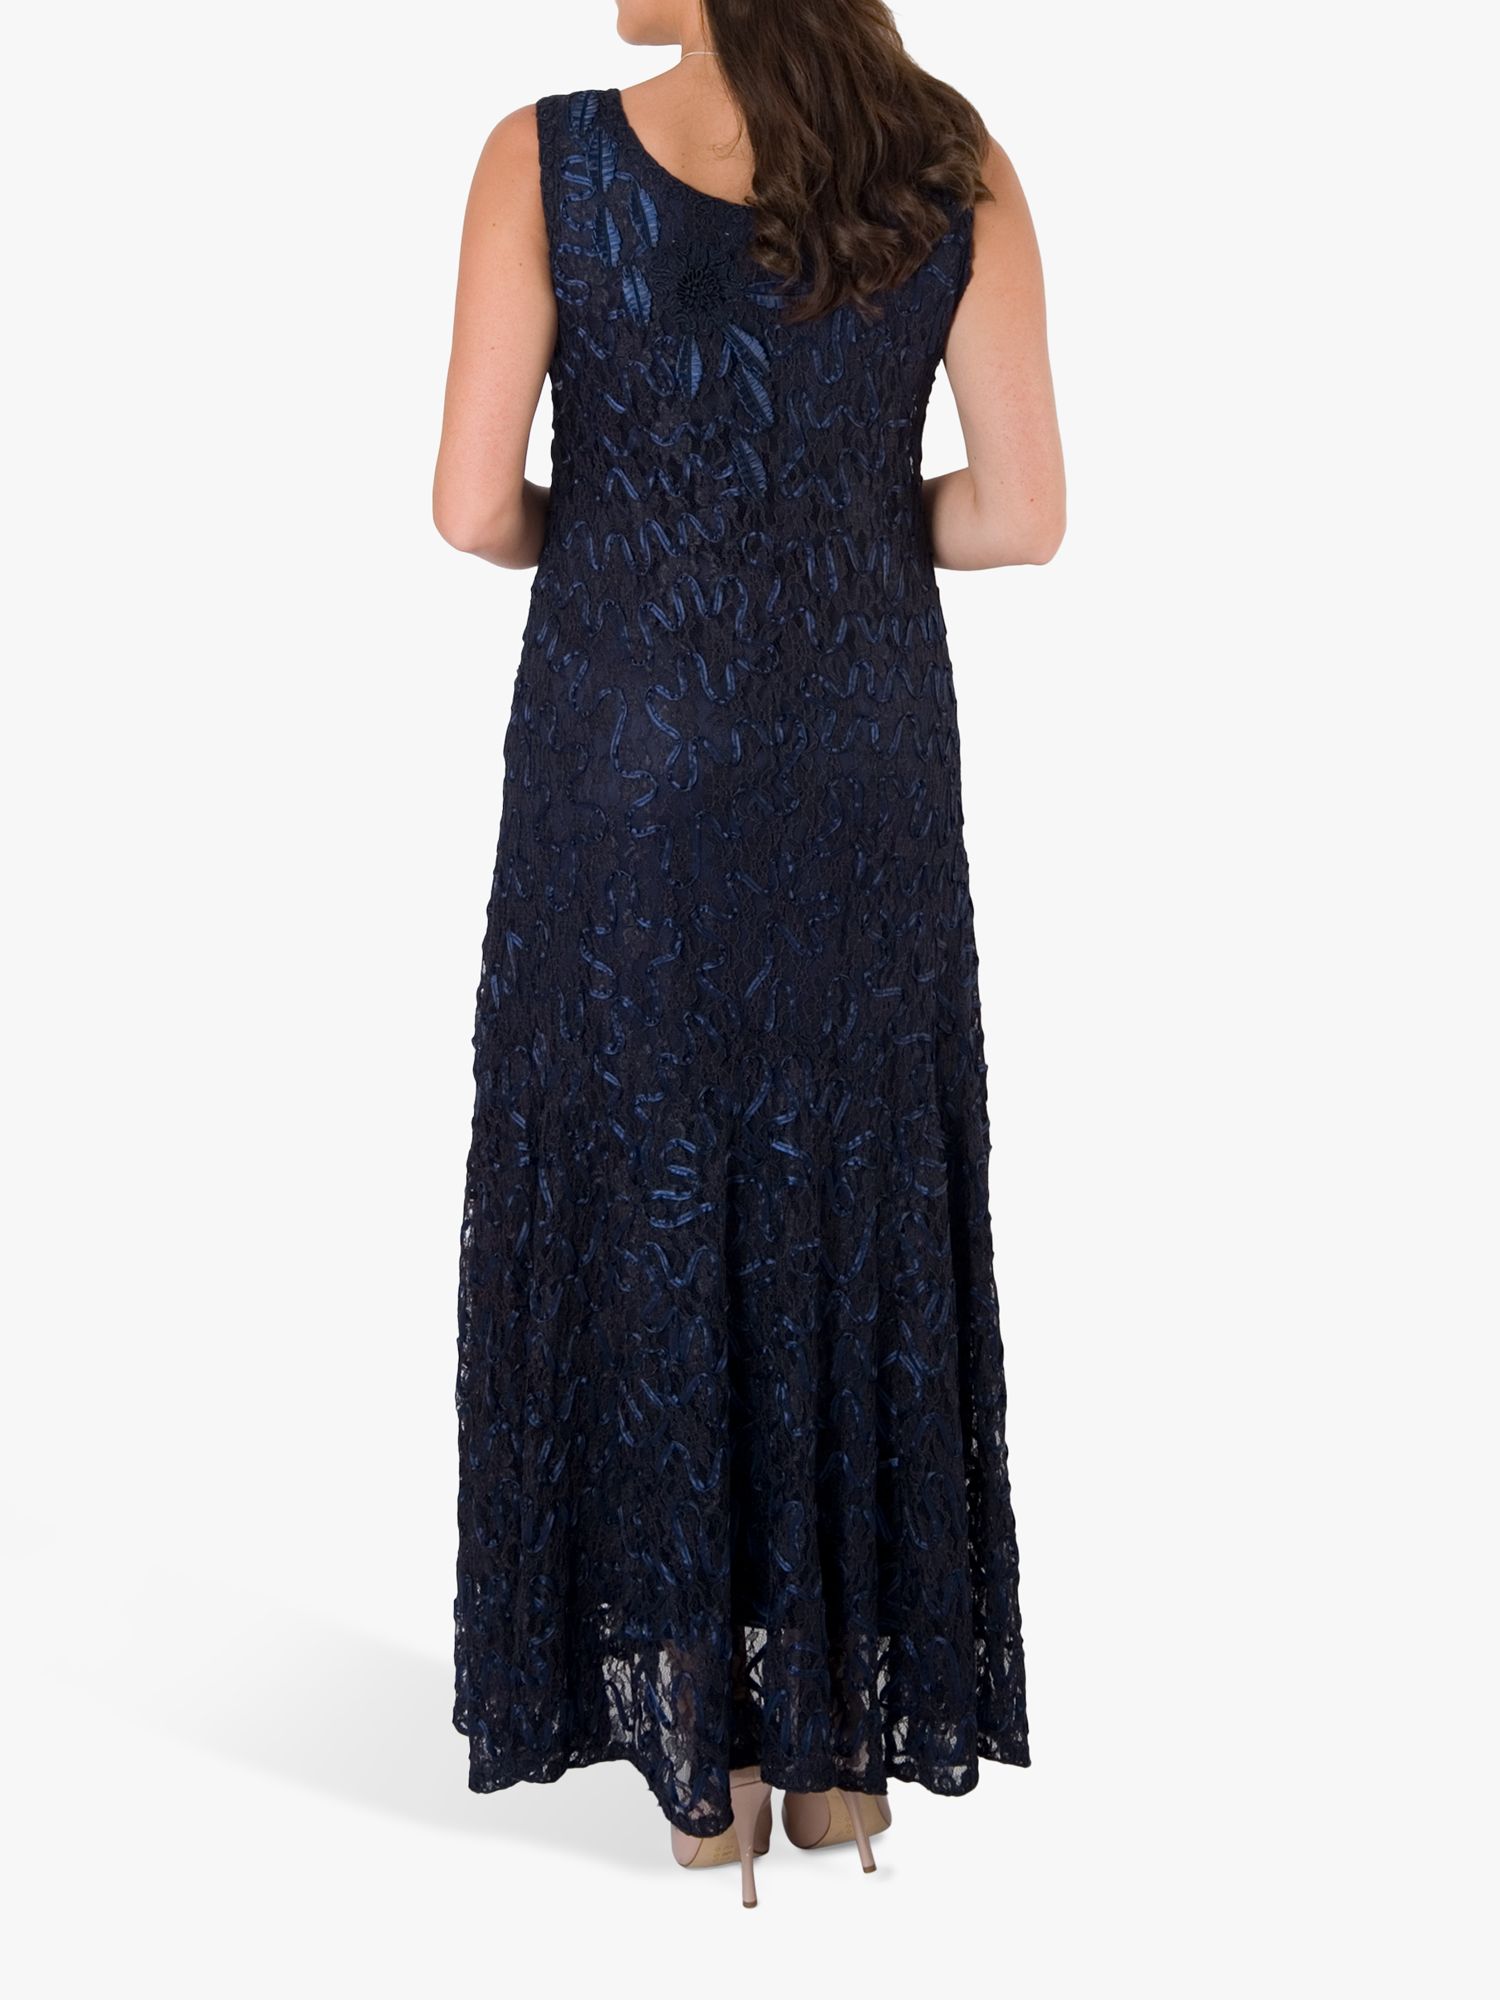 Buy Chesca Cornelli Lace Dress, Navy Online at johnlewis.com